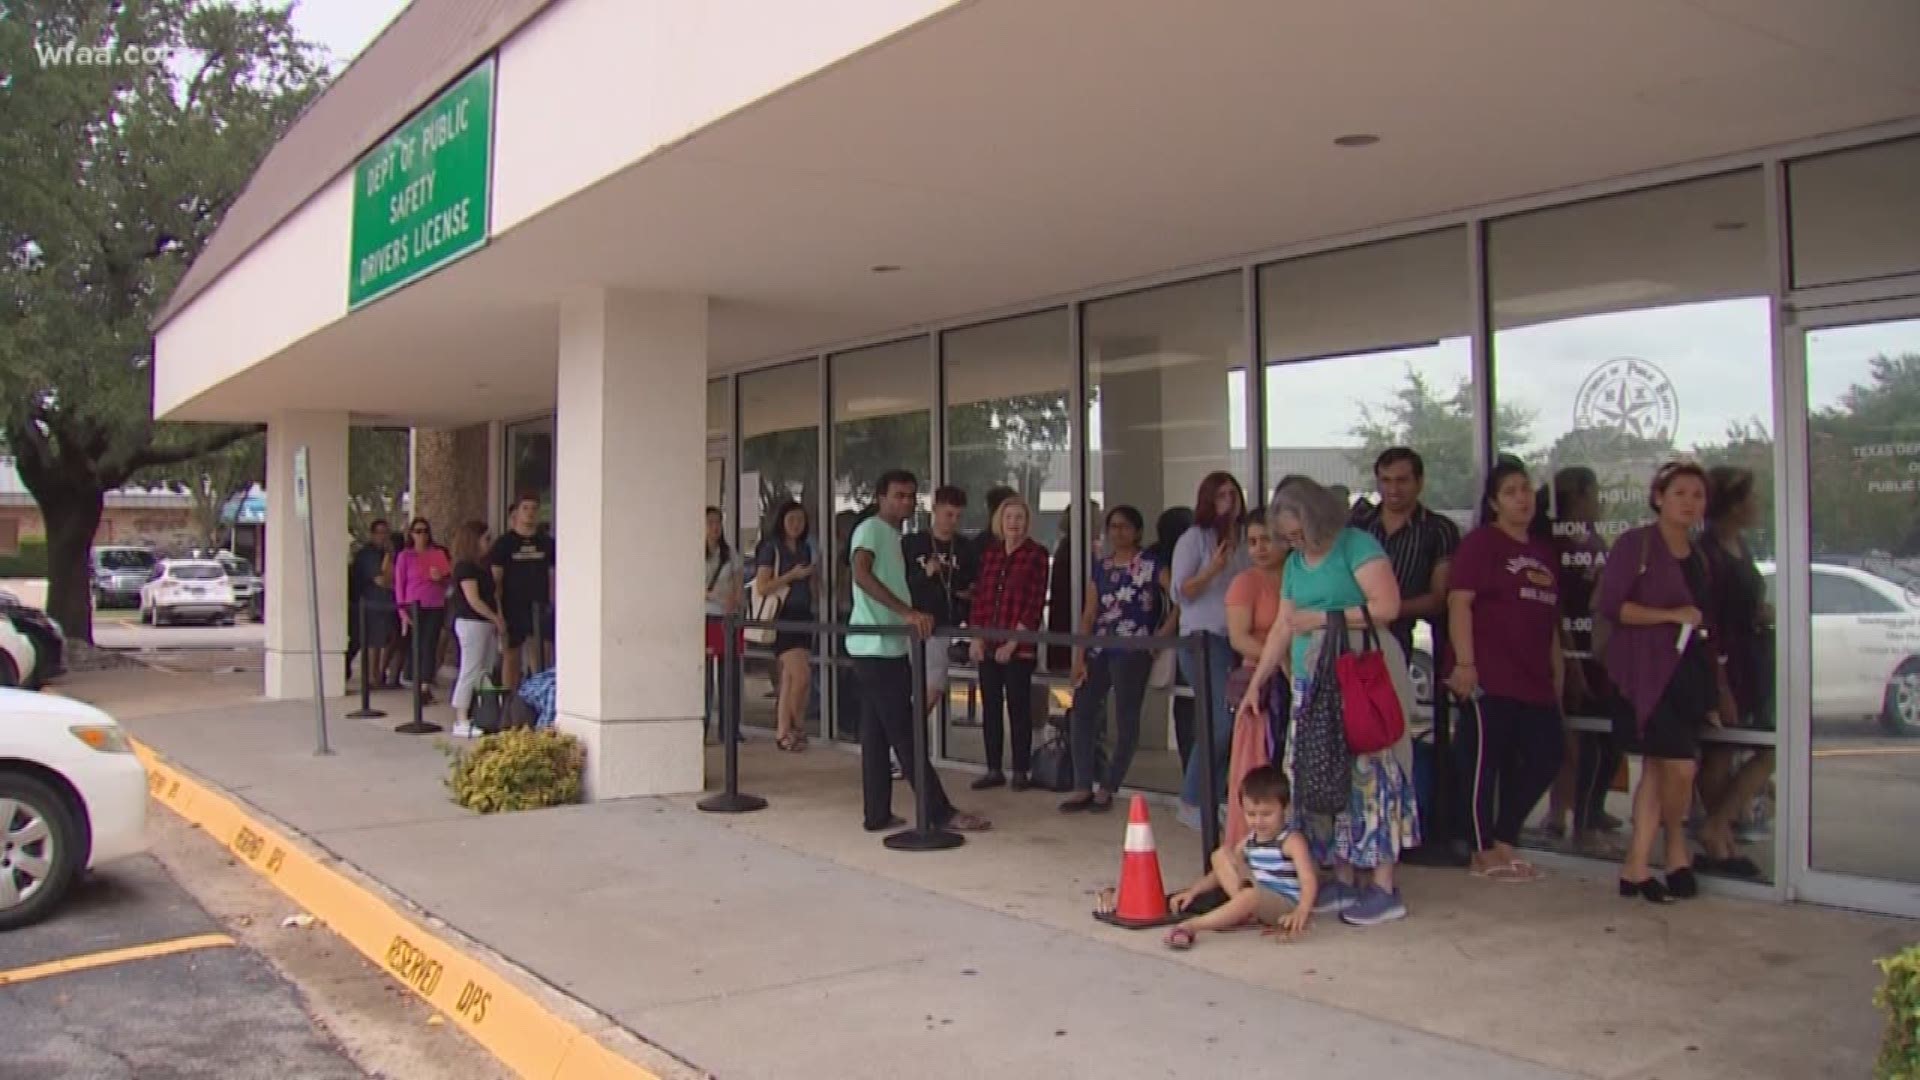 Texas legislators approved an increase to the state's driver licensing center budget this year, but Gov. Greg Abbott ordered Department of Public Safety officials to move faster to shorten long lines for people waiting to renew or get new licenses.